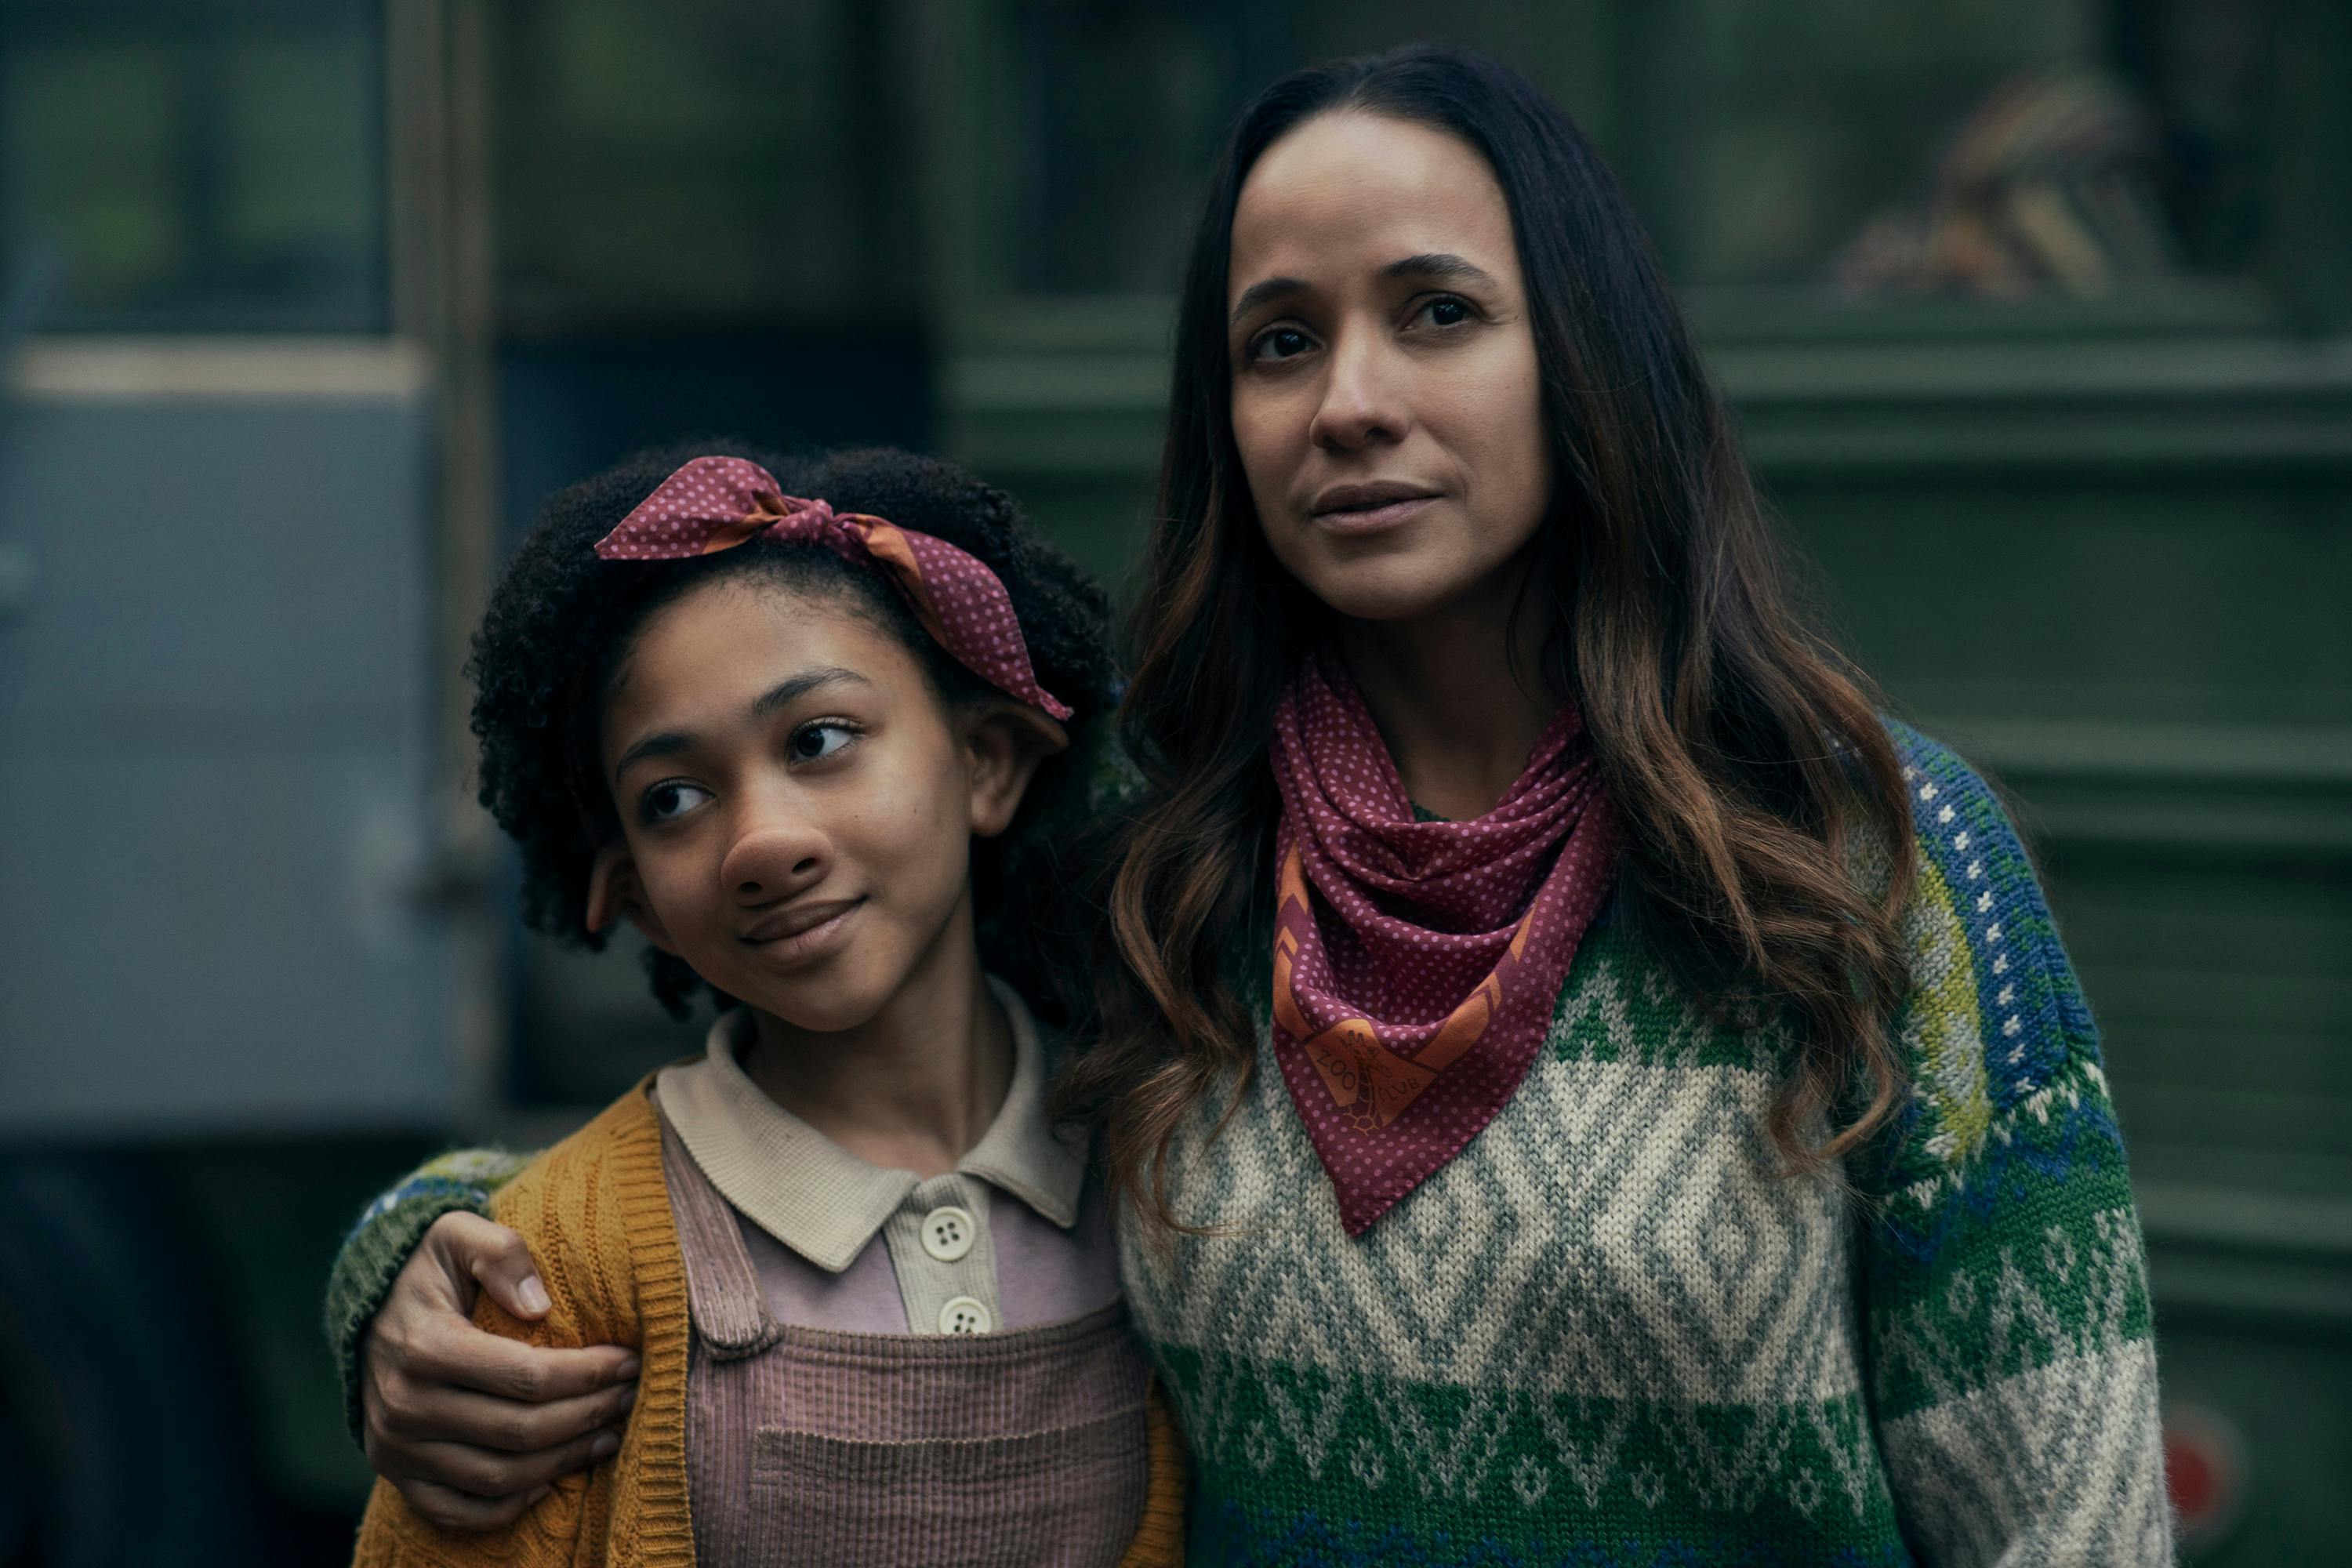 Wendy (Naledi Murray) and Aimee (Dania Ramirez) stand together outside. Wendy wears purple corduroy overalls and a yellow cardigan, and a headband. Aimee wears a patterned sweater and a scarf with the same pattern as Wendy’s headband around her neck. 